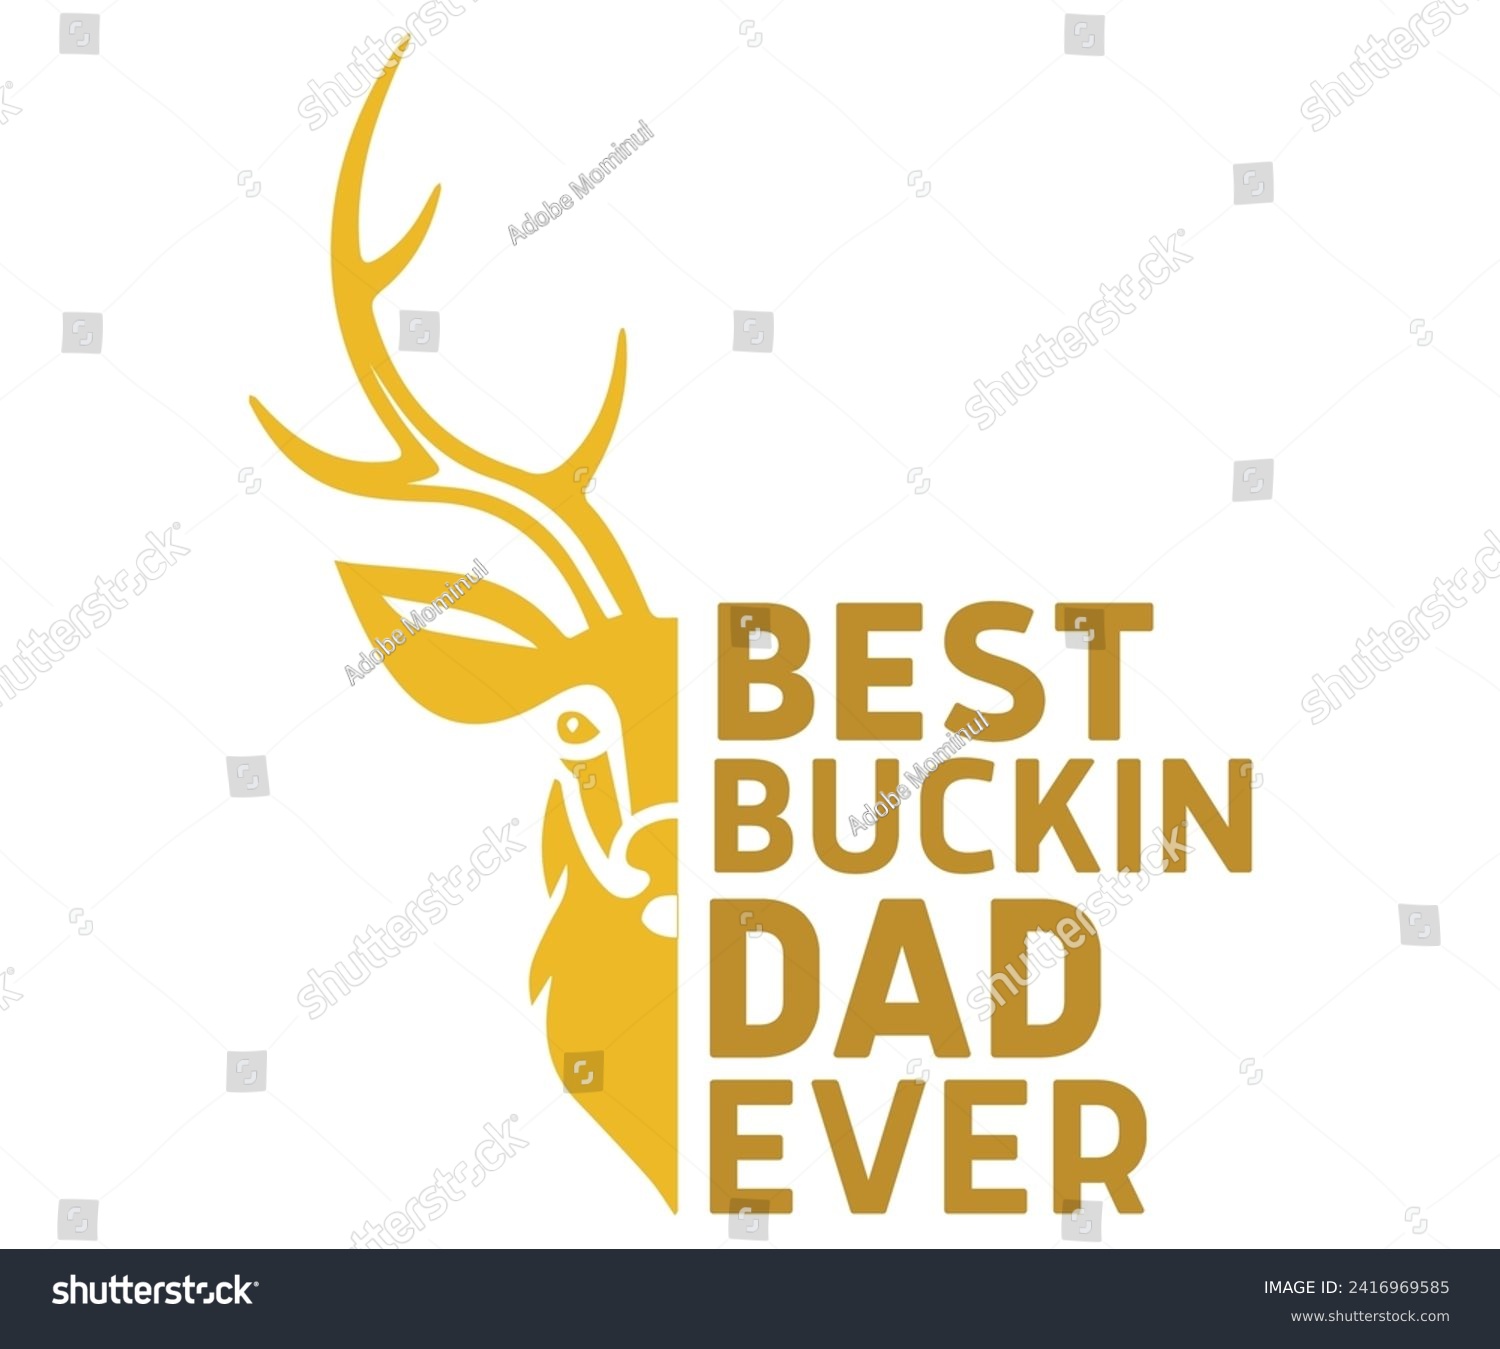 SVG of Best Buckin Dad Ever Svg,Father's Day Svg,Papa svg,Grandpa Svg,Father's Day Saying Qoutes,Dad Svg,Funny Father, Gift For Dad Svg,Daddy Svg,Family Svg,T shirt Design,Svg Cut File,Typography svg